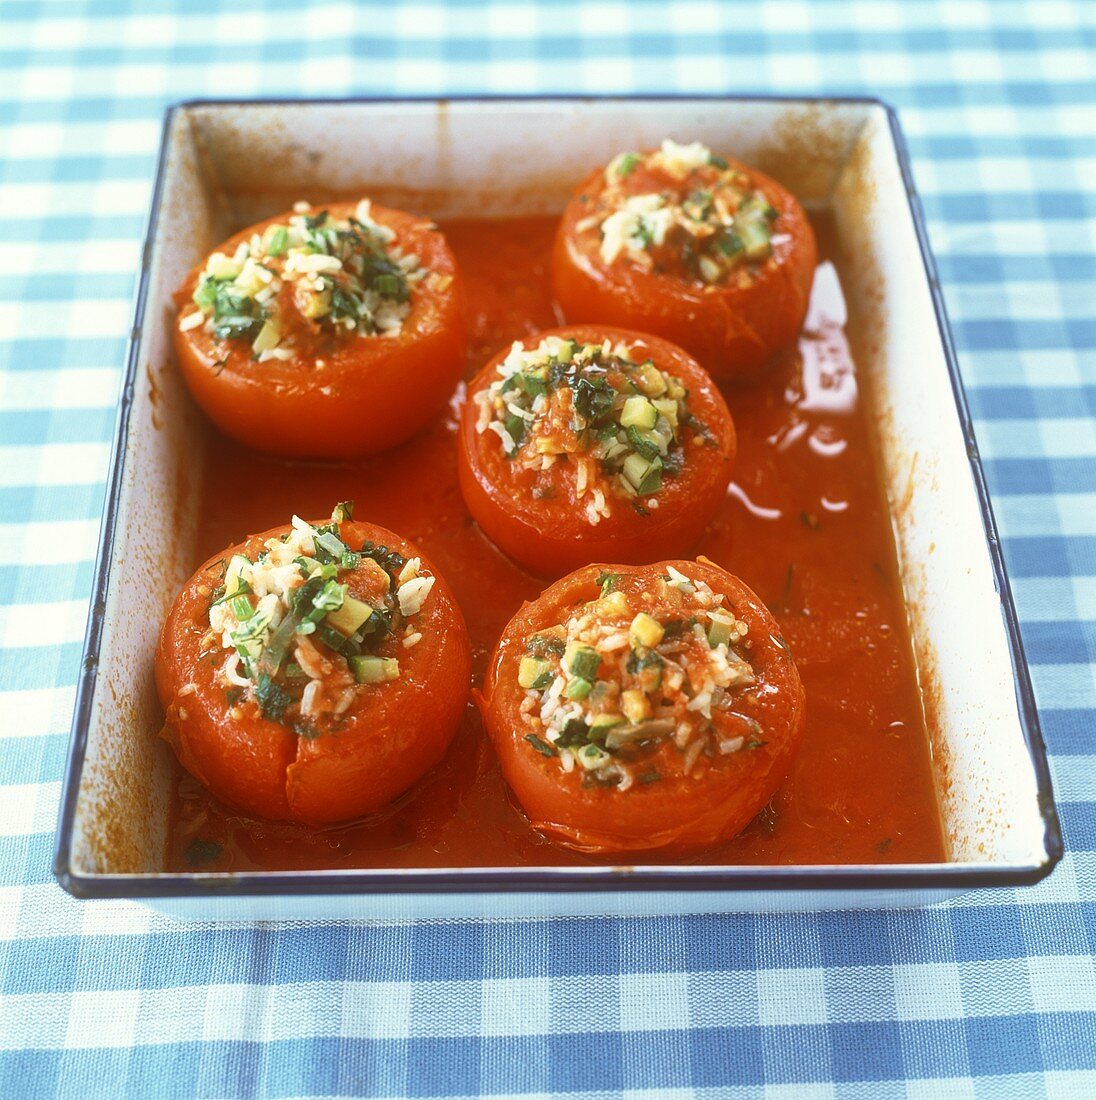 Stuffed tomatoes with rice, courgettes and herbs